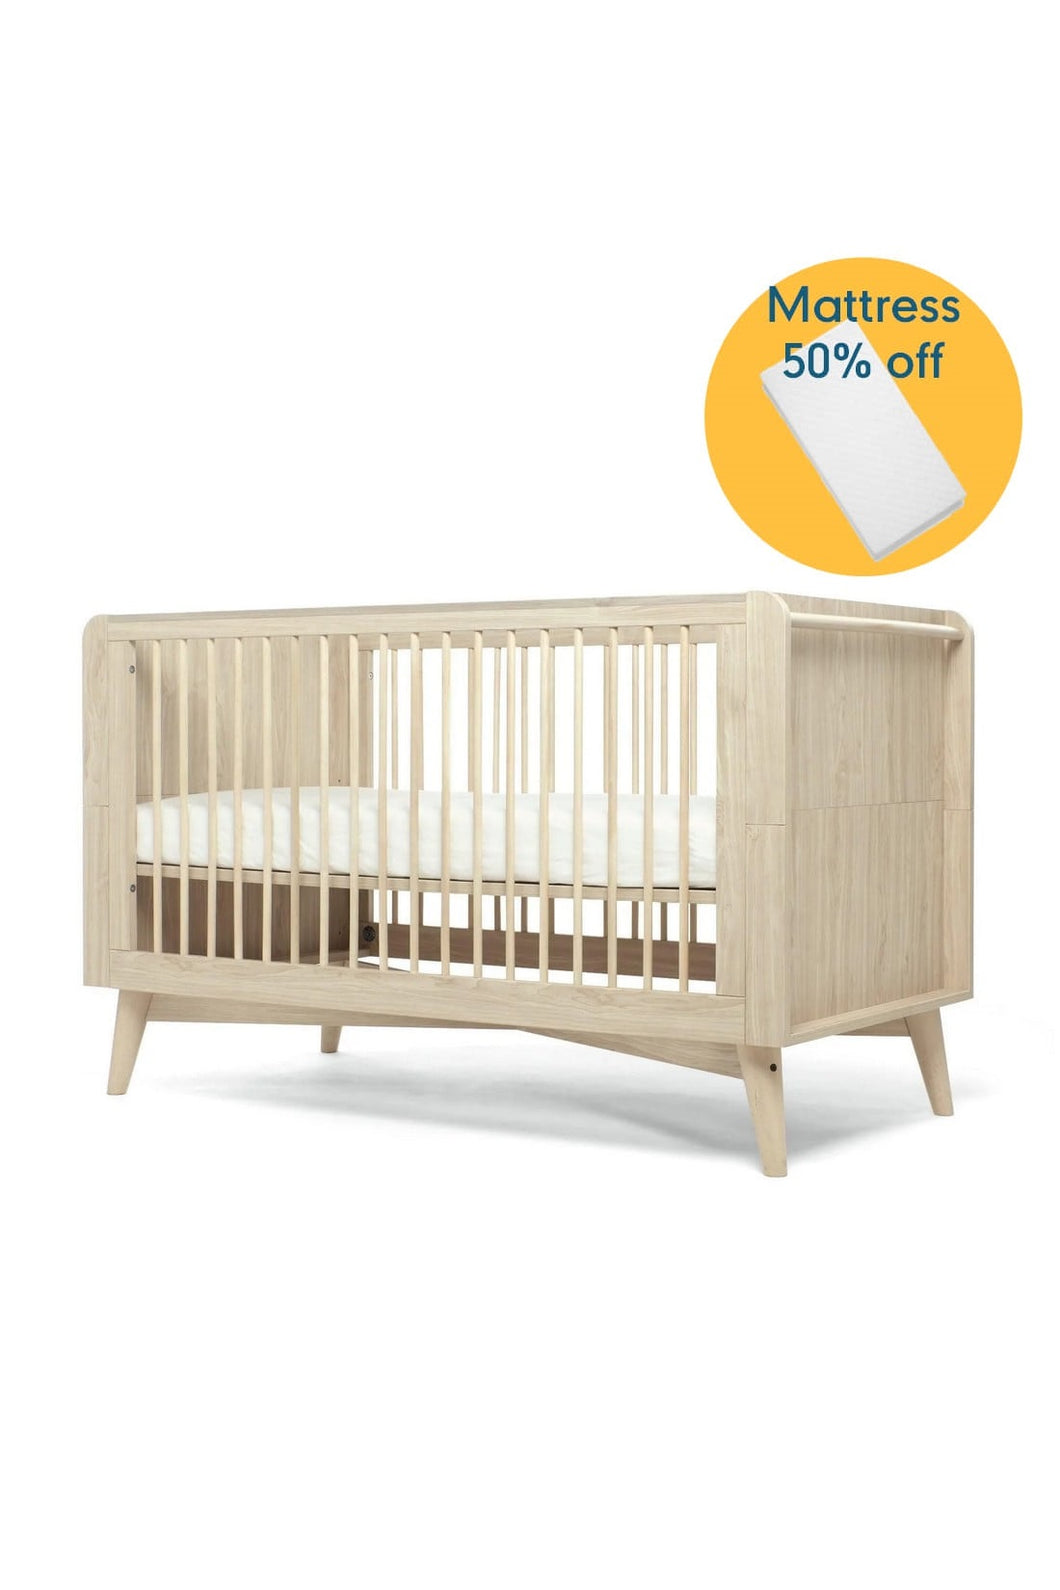 Mamas & Papas Coxley Cotbed - Natural Bundle Offer (50% off in Mattress)